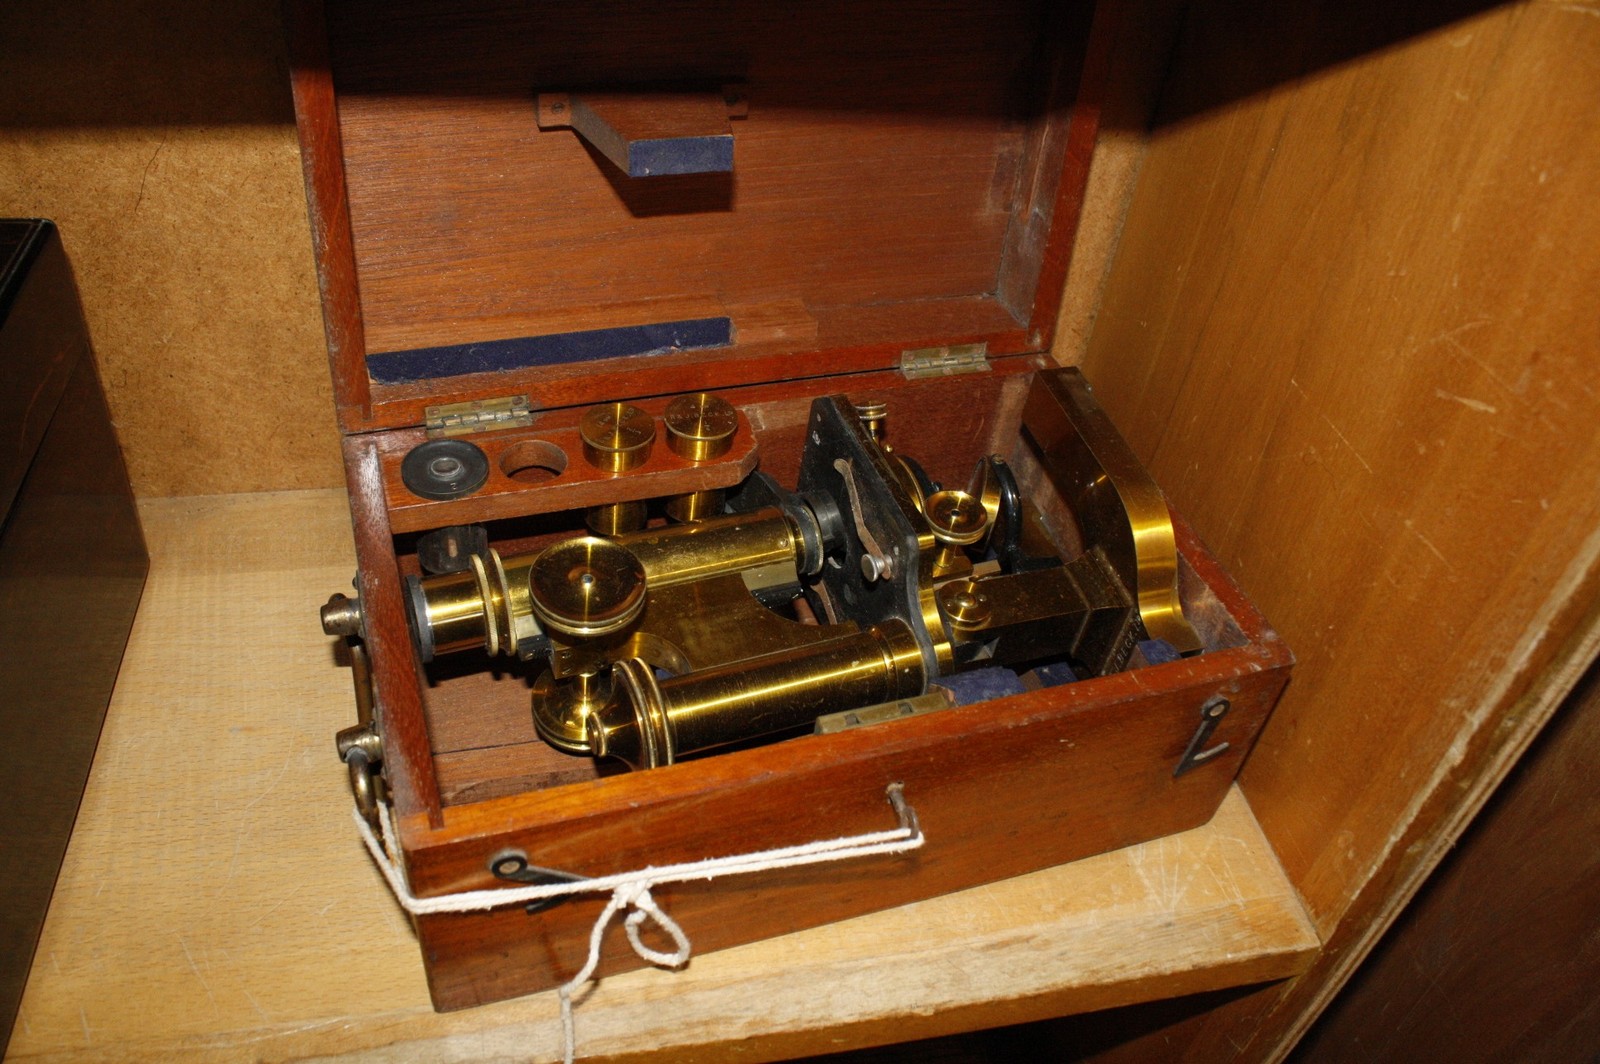 A R & J. Beck microscope in fitted wooden case